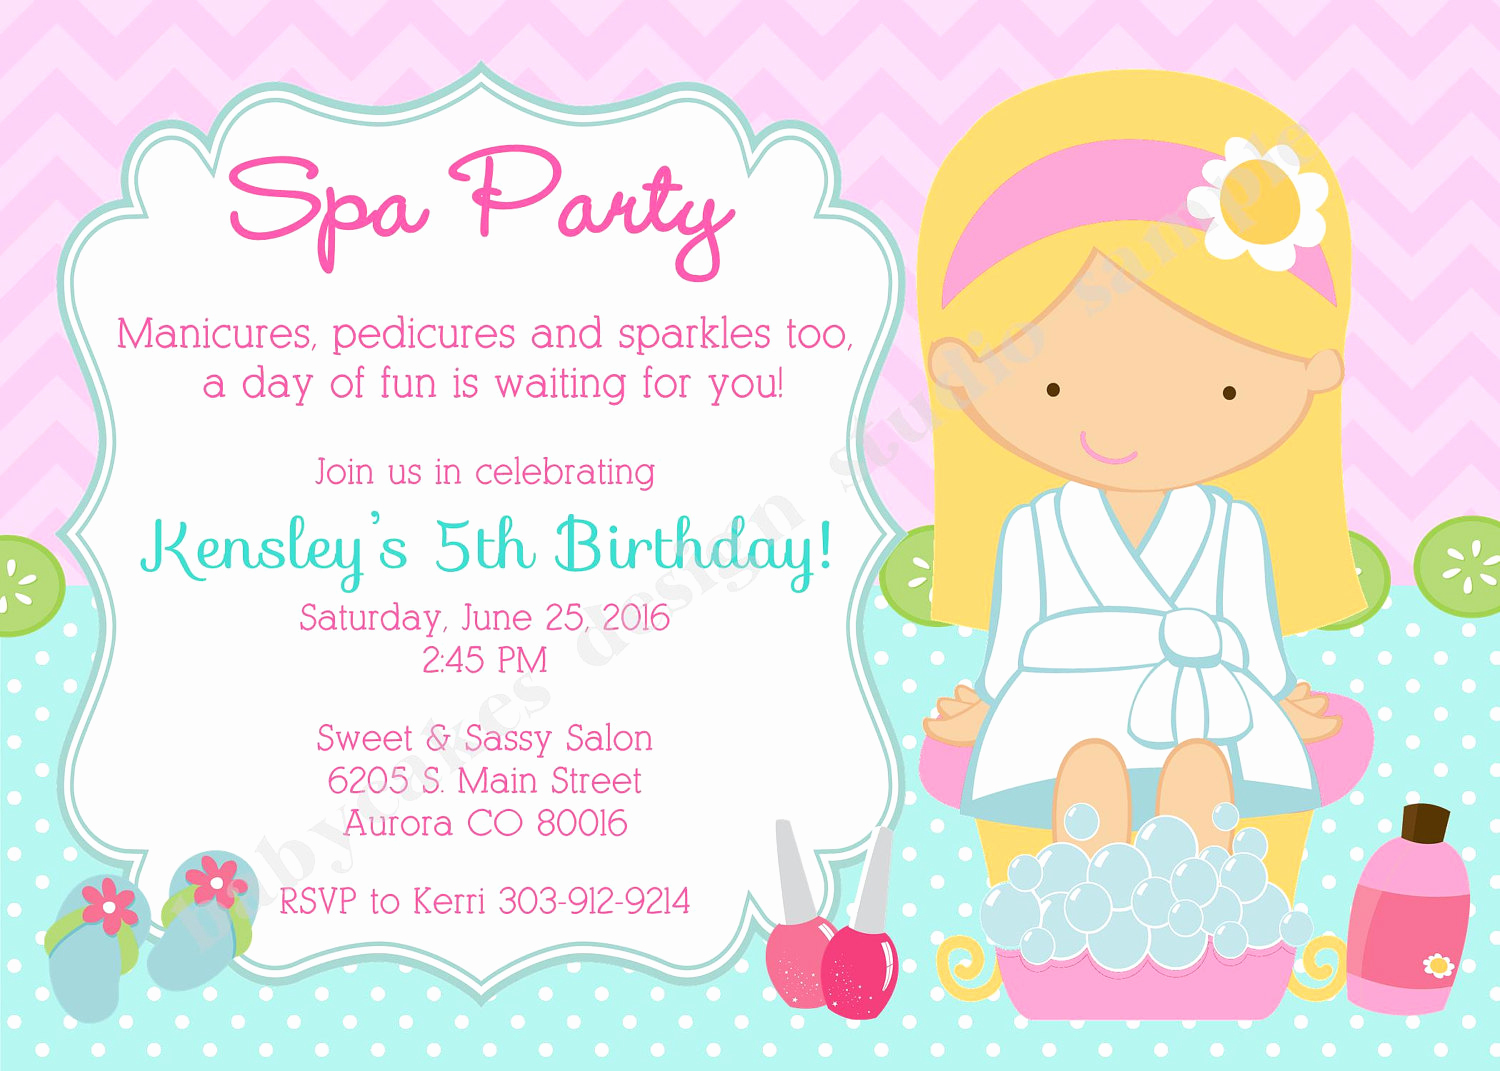 Spa Party Invitation Wording Luxury Spa Party Invitation Invite Spa Birthday Party Invitation